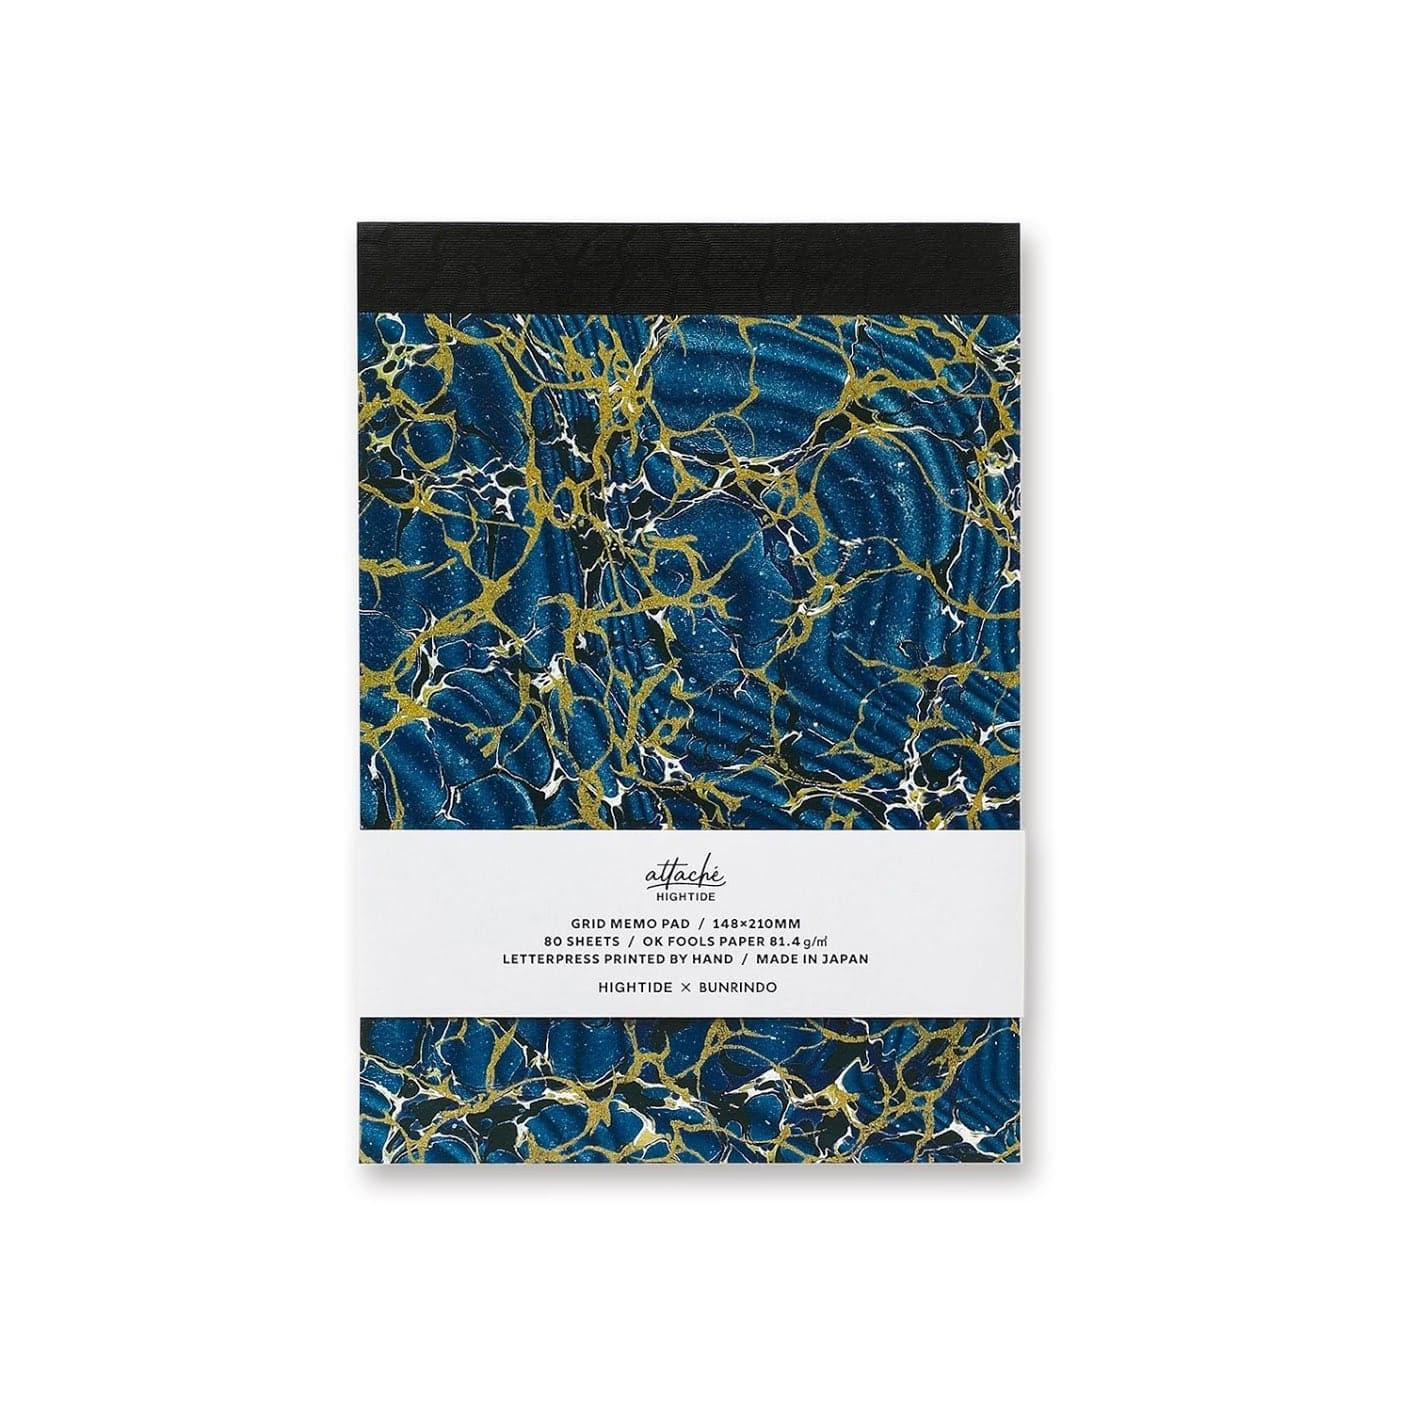 Hightide Limited Edition Attaché Letterpress Printed Memo Pad (A5, Grid) - Blue